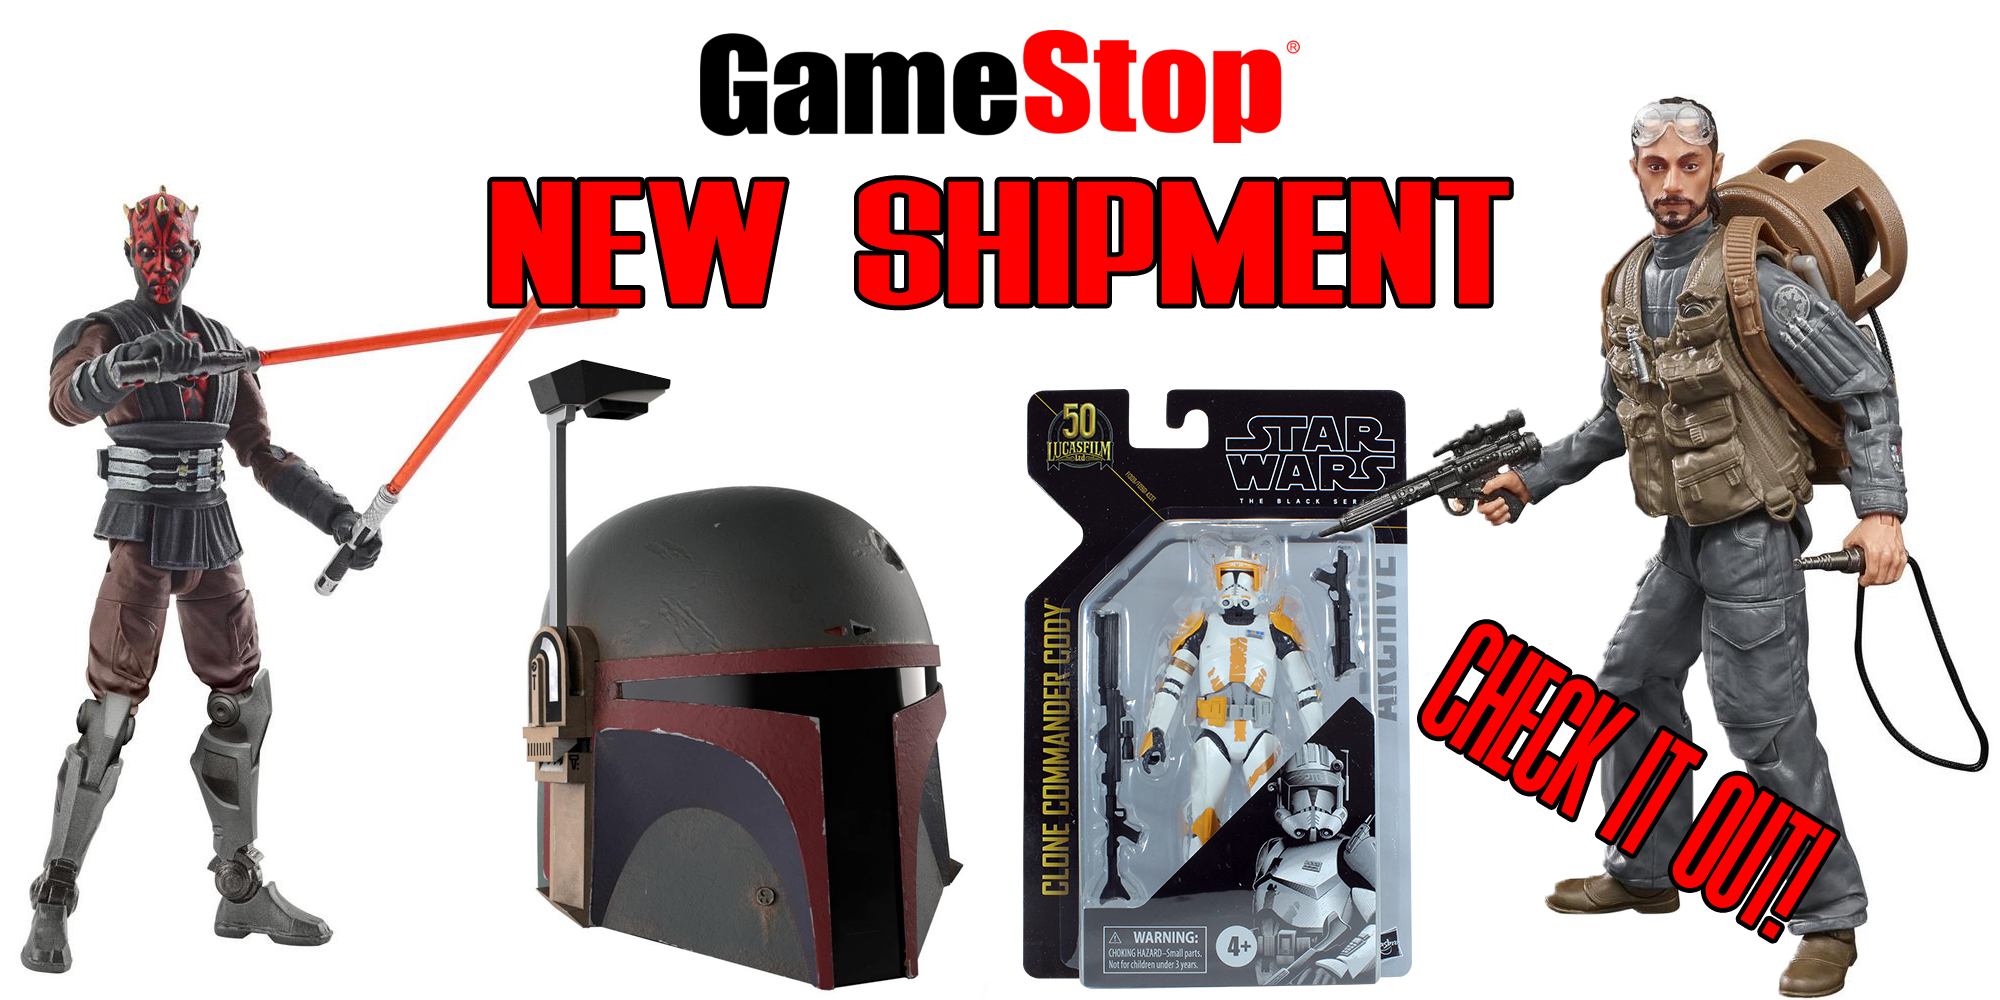 Gamestop New Shipment! Check It Out!